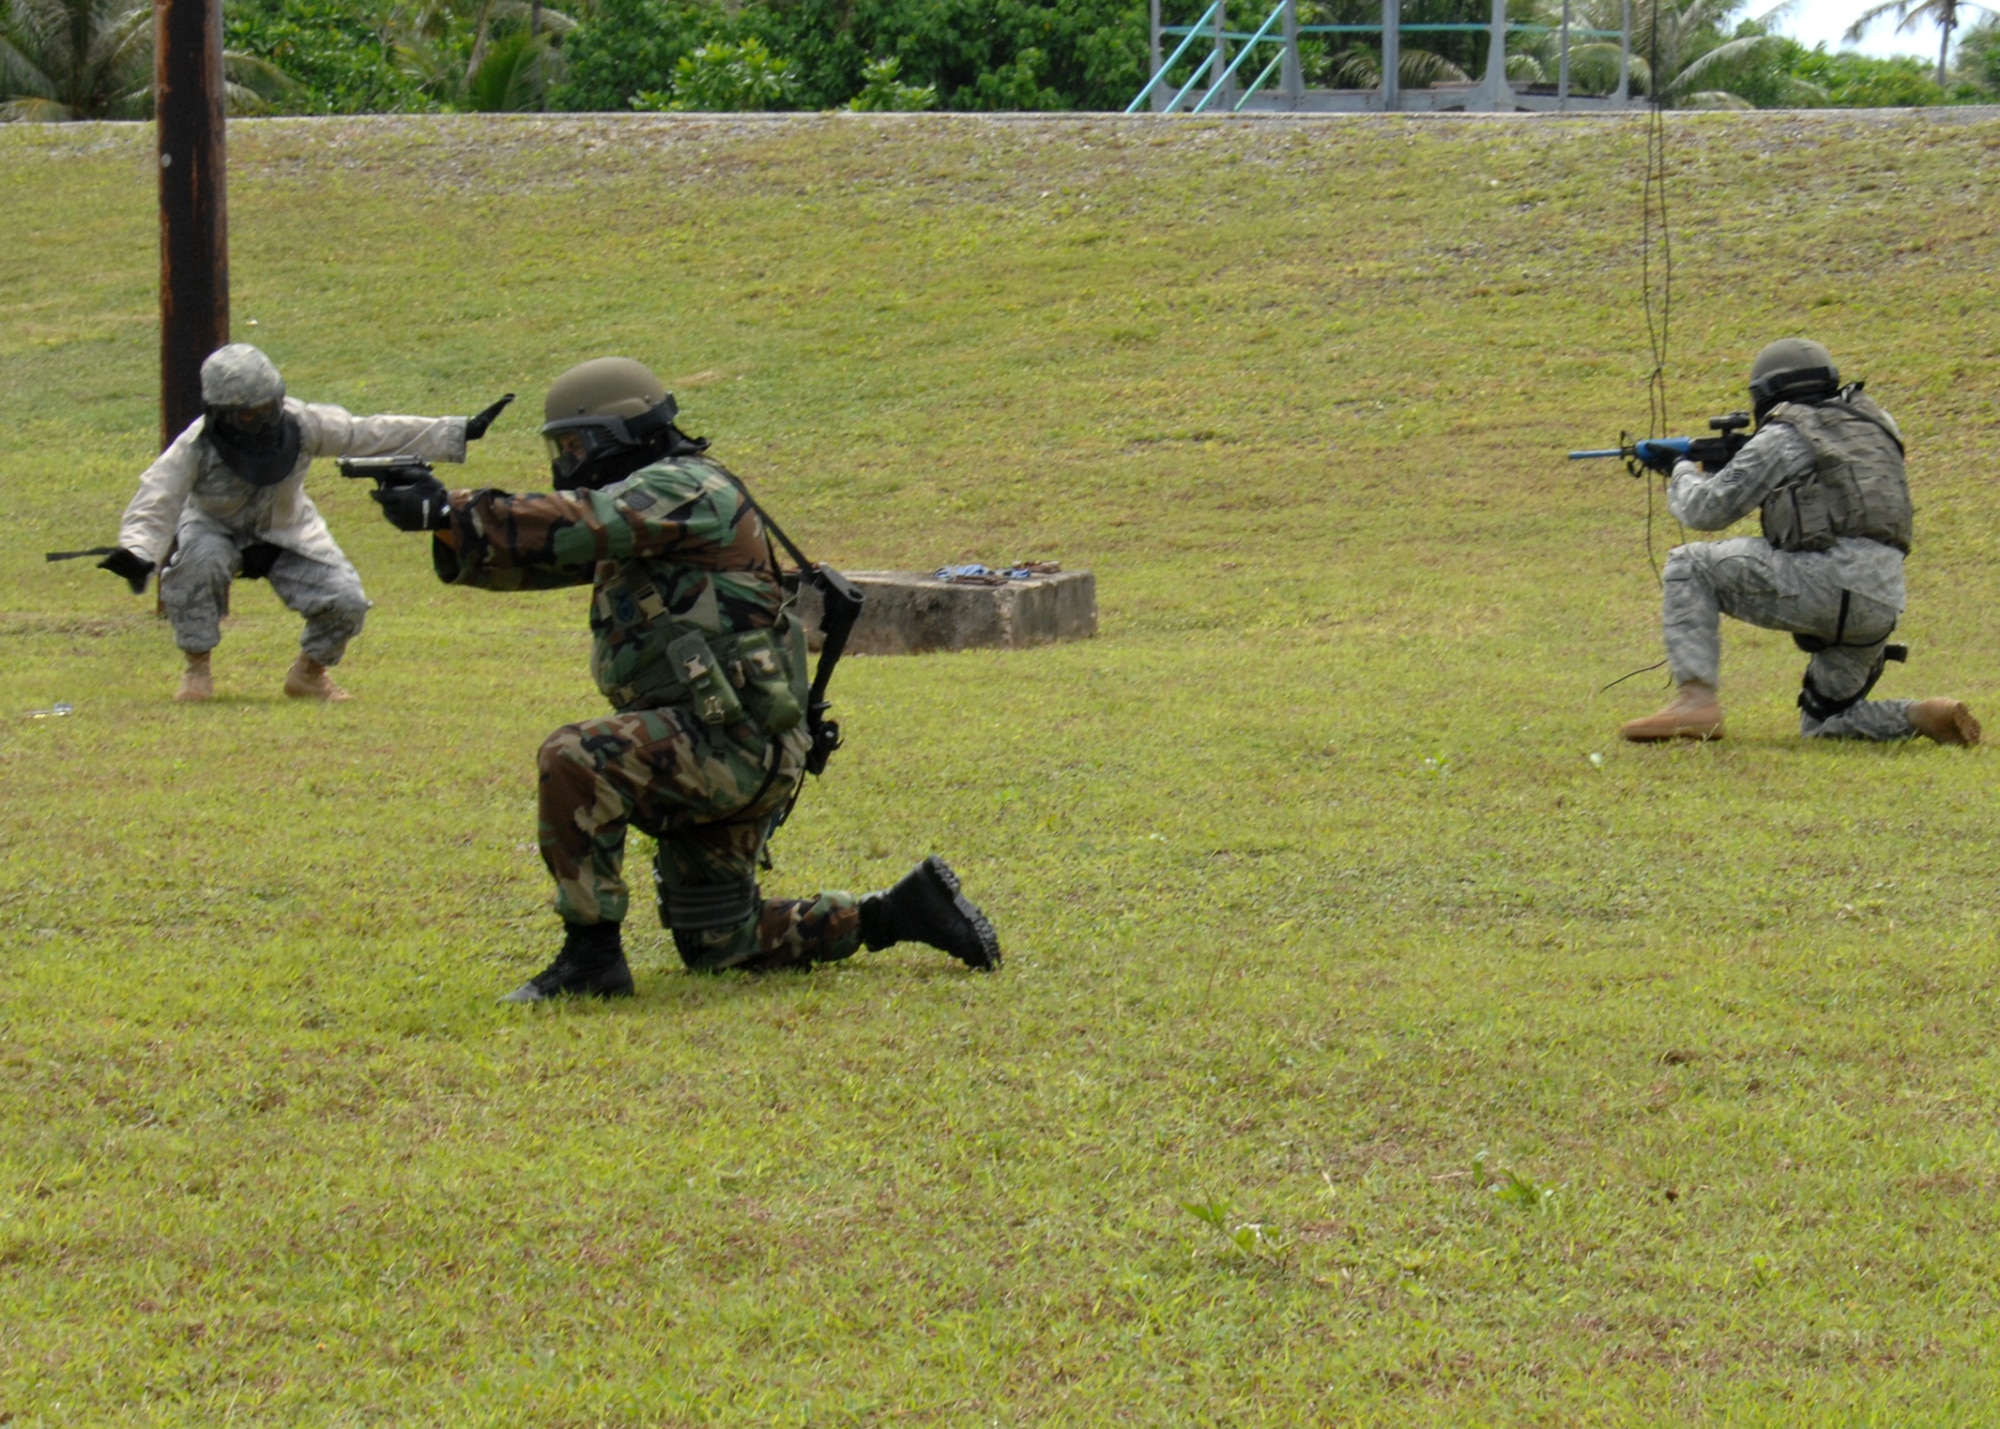 Security Forces Airmen from across the Pacific Air Forces perform live fire scenarios with M-9 Simunition configured training weapons and colored FX rounds during the Commando Warrior simunitions training course at Andersen Air Force Base, Guam July 30.  The five day course was hosted by the 736th Security Forces Squadron and was attended by Security Forces Airmen across the Pacific Air Forces. (U.S. Air Force photo by Airman 1st Class Nichelle Griffiths)